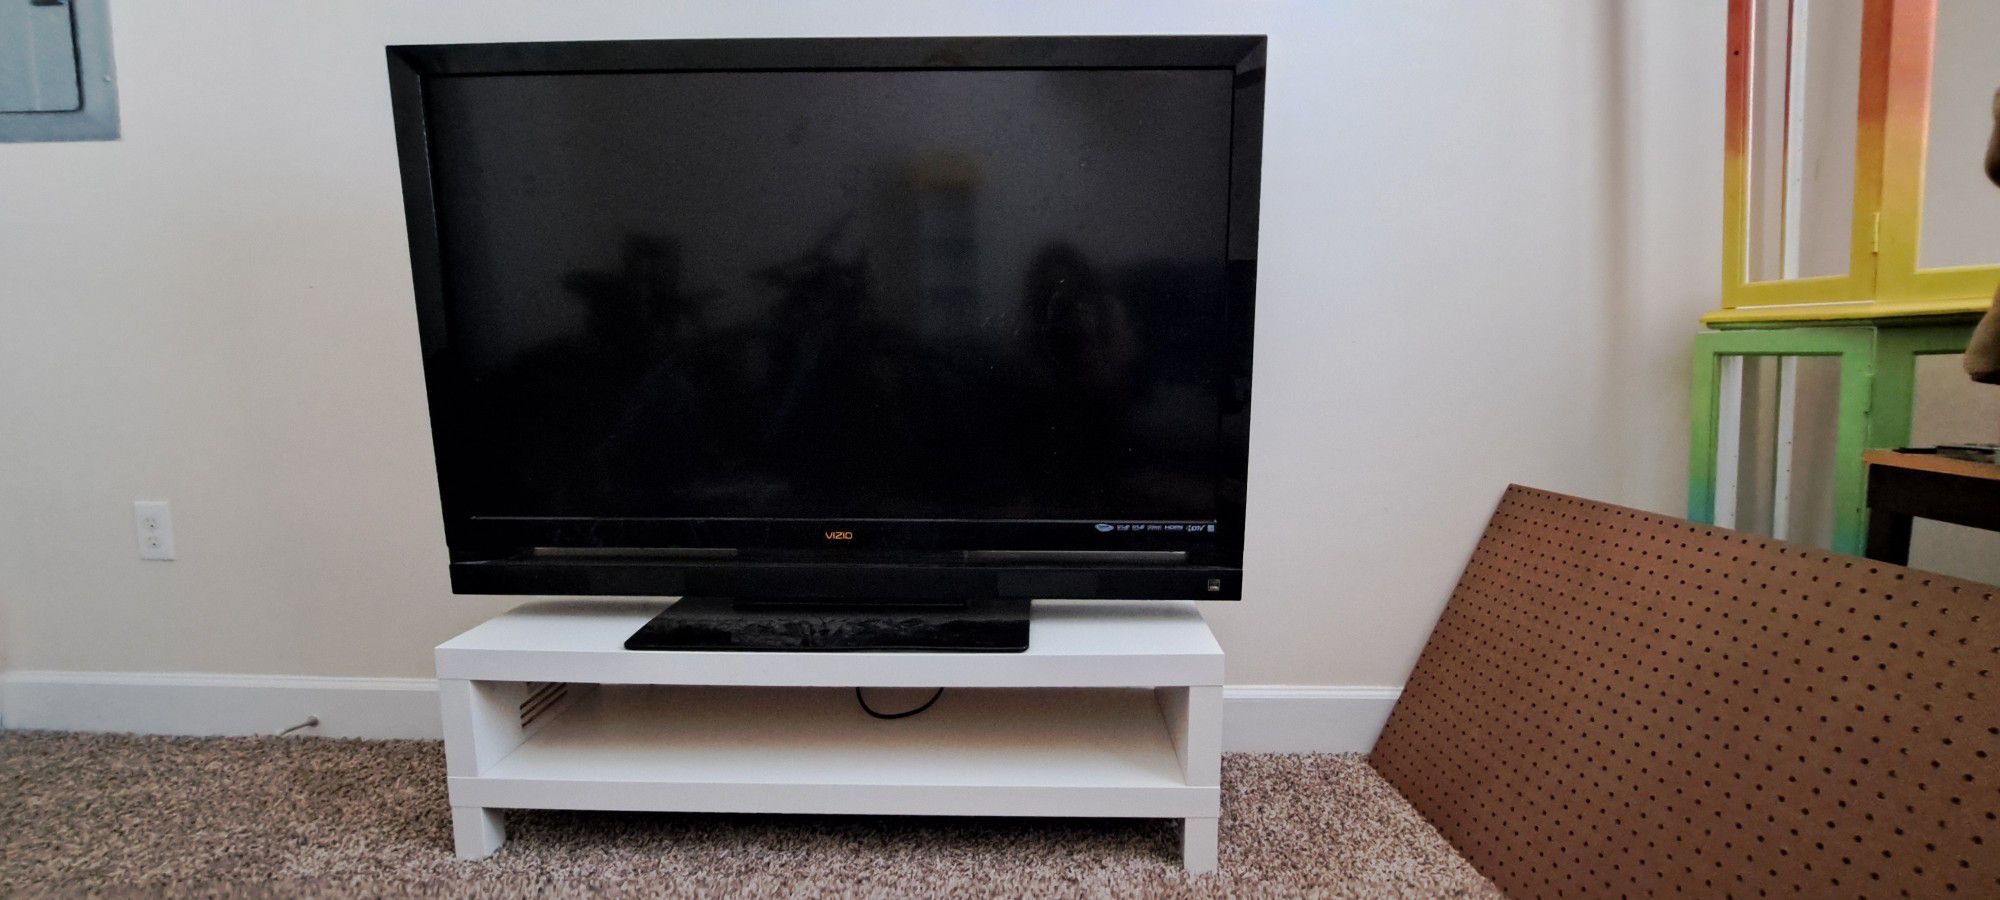 Large 55in TV